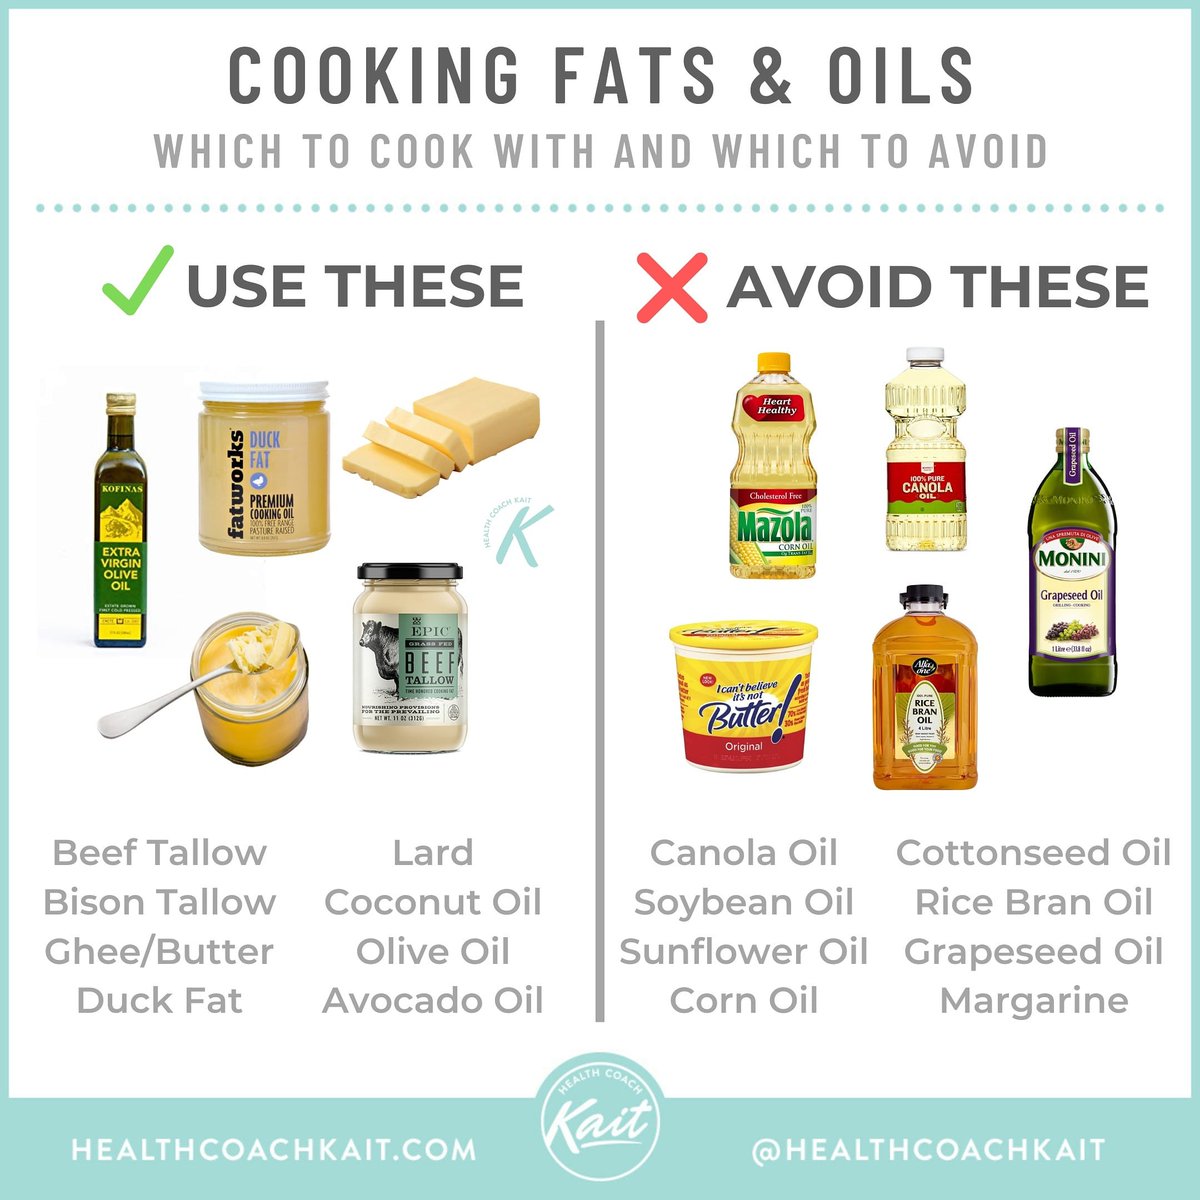 4 Healthy Cooking Oils (and 4 to Avoid)